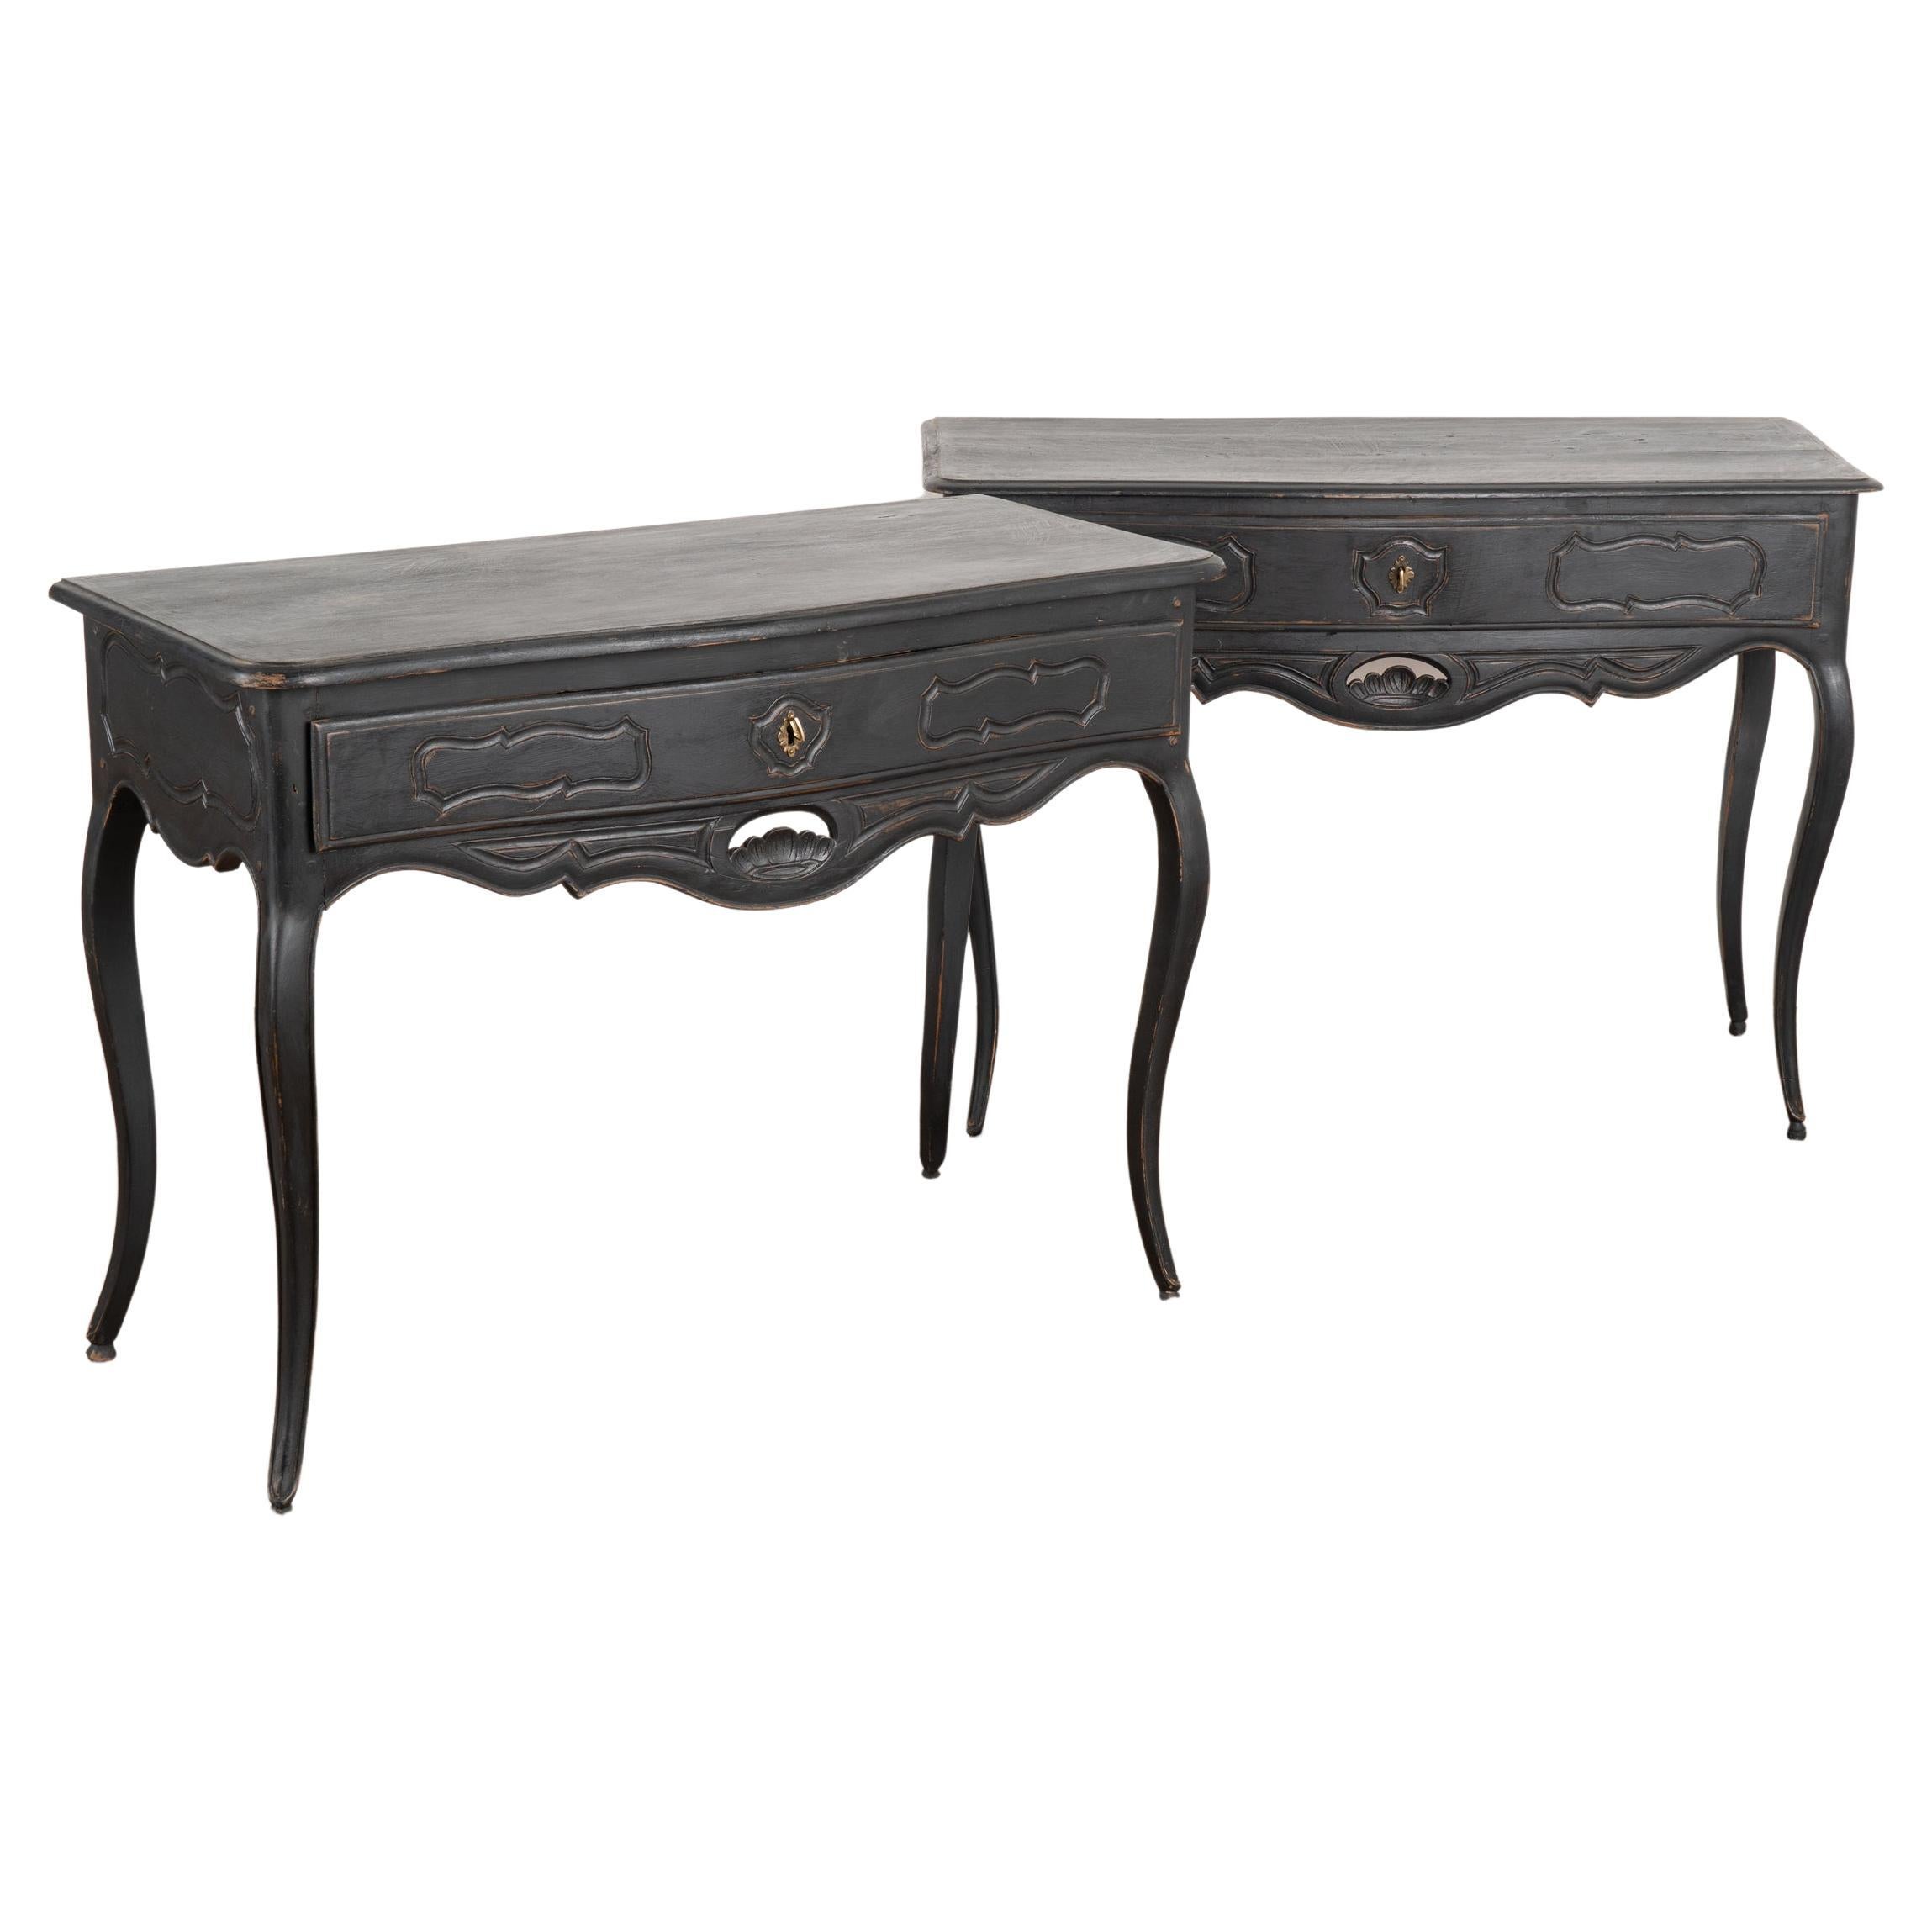 Pair, Black Carved Side Tables With Cabriolet Legs, France circa 1850-70